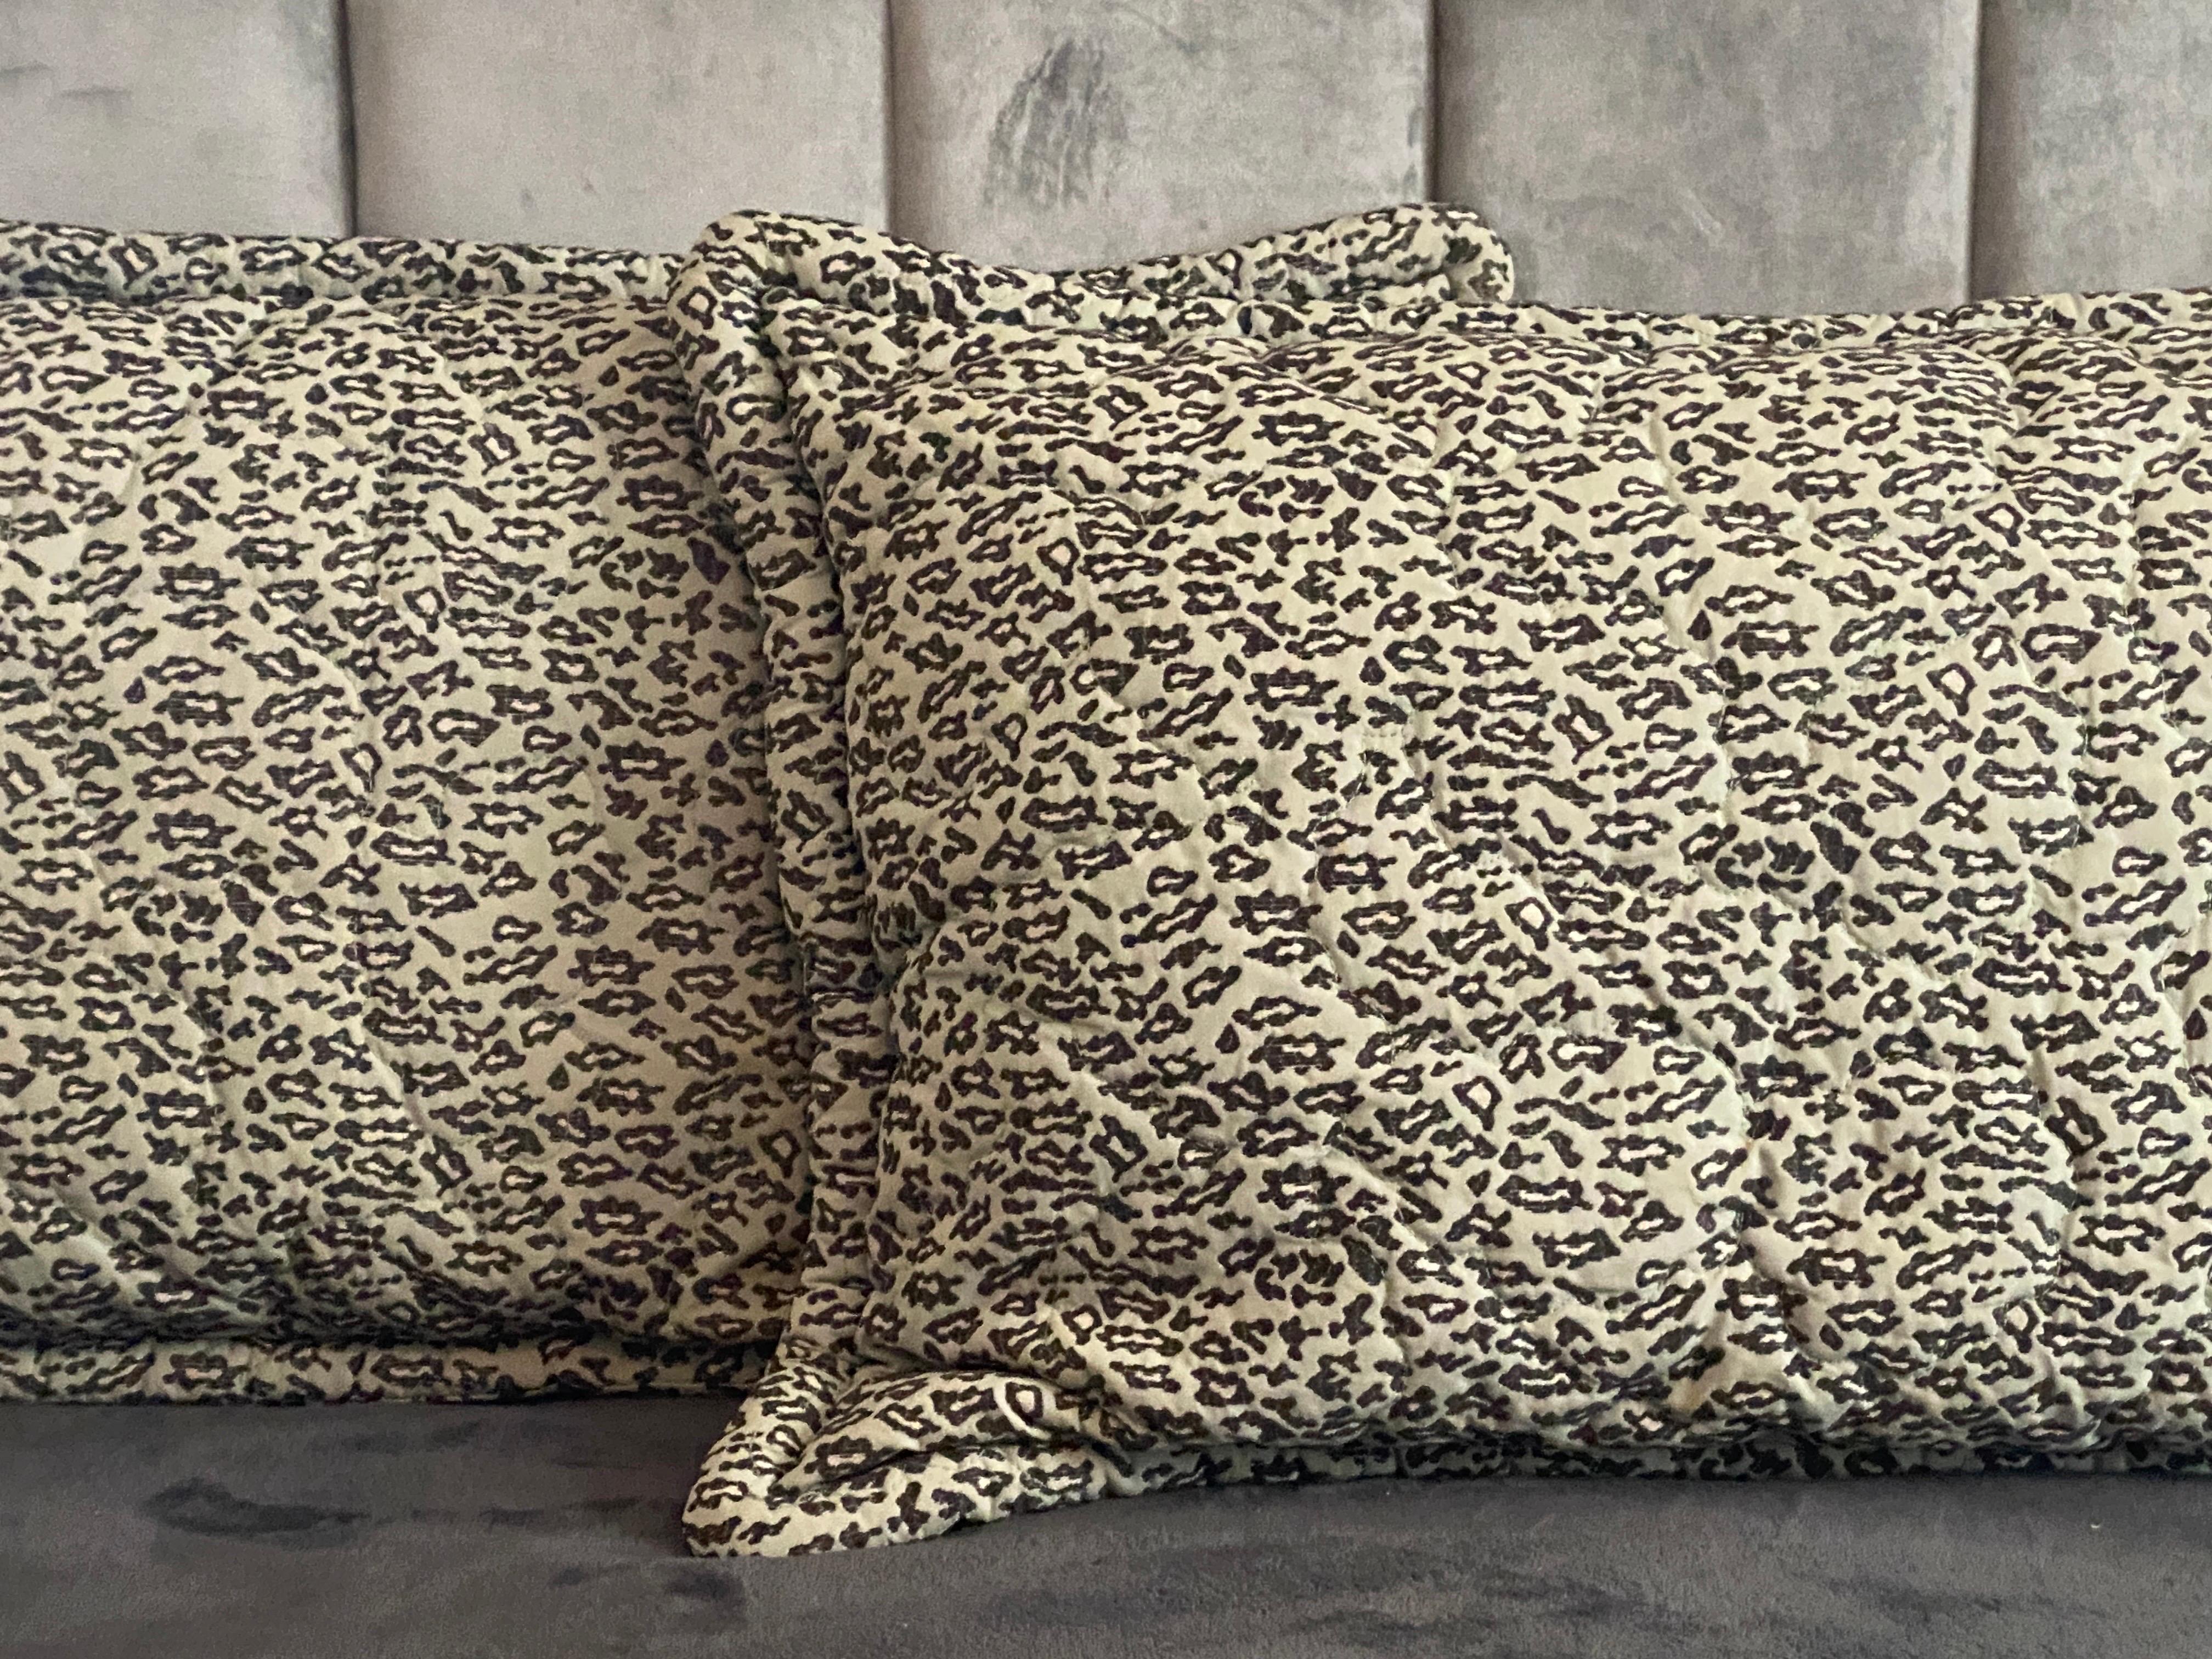 Pair of Rare Jay Spectre Quilted Pillow Shams in Mint & Black/White Leopard  For Sale 5